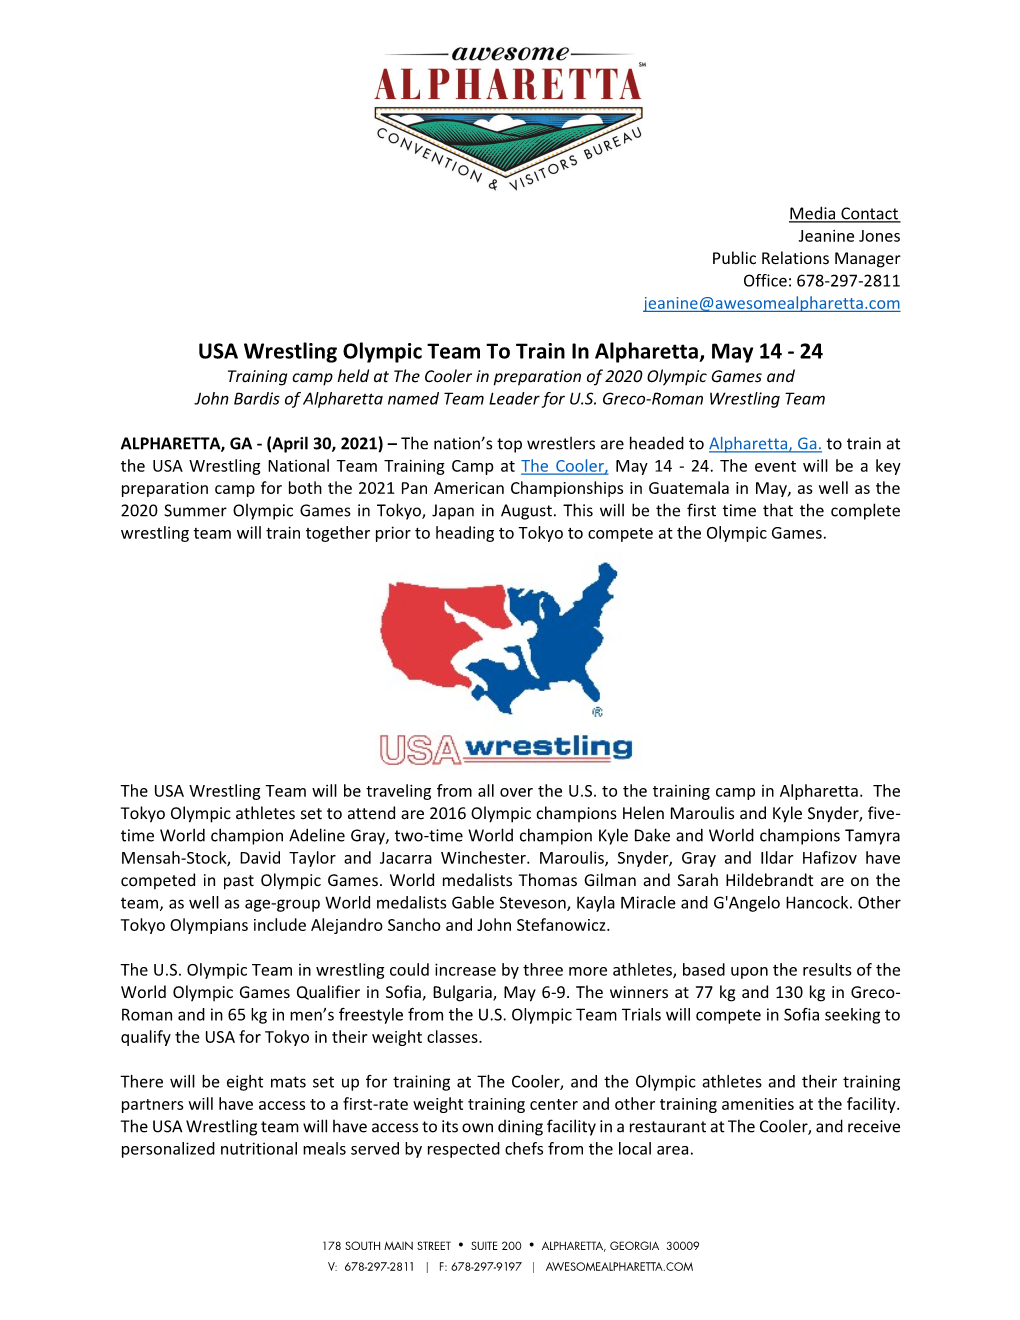 USA Wrestling Olympic Team to Train in Alpharetta, May 14